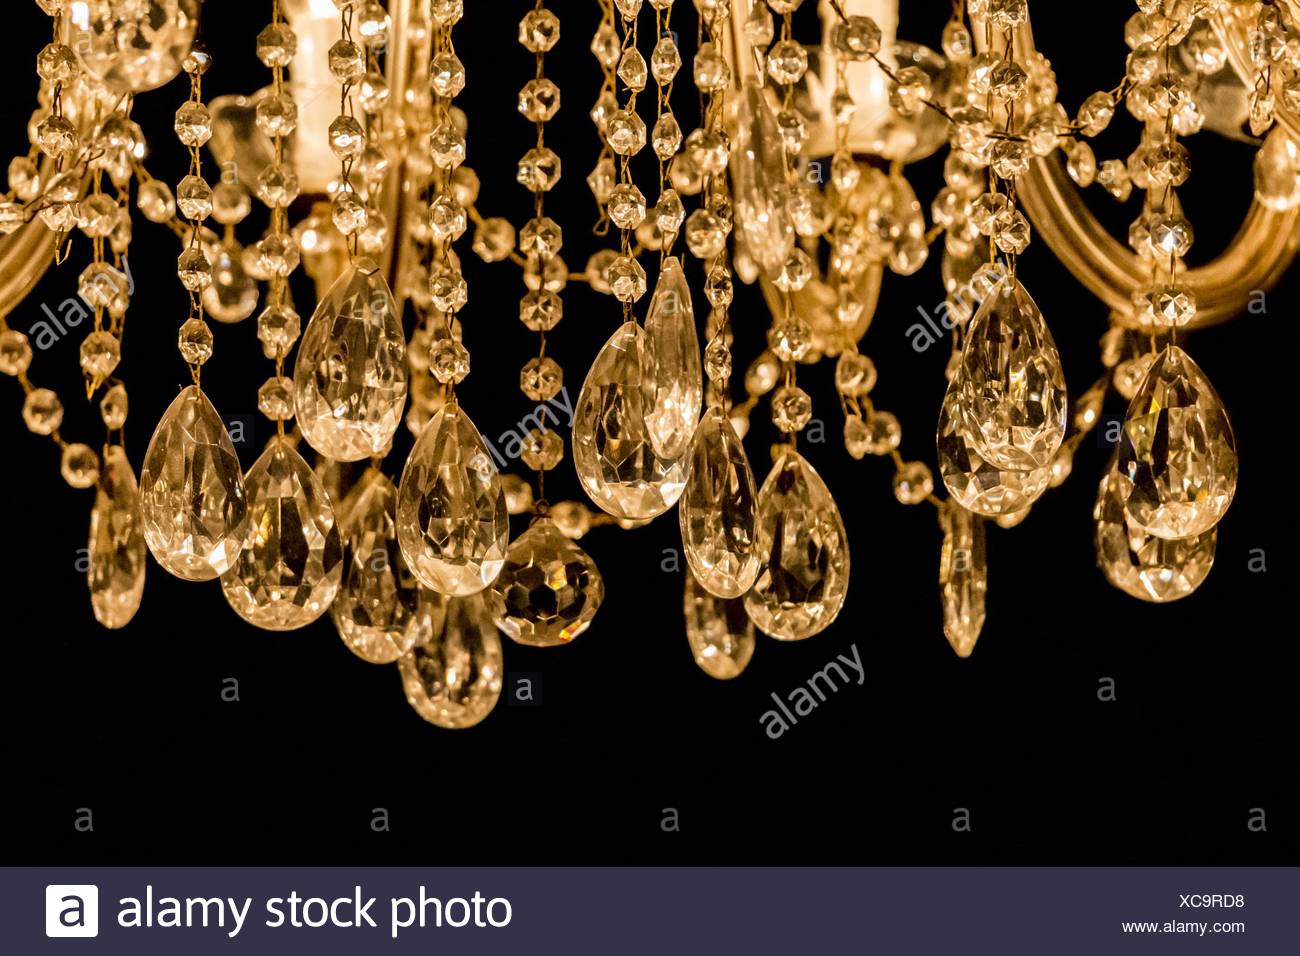 Gallant Chandelier With Light Candles And Dark Background Stock